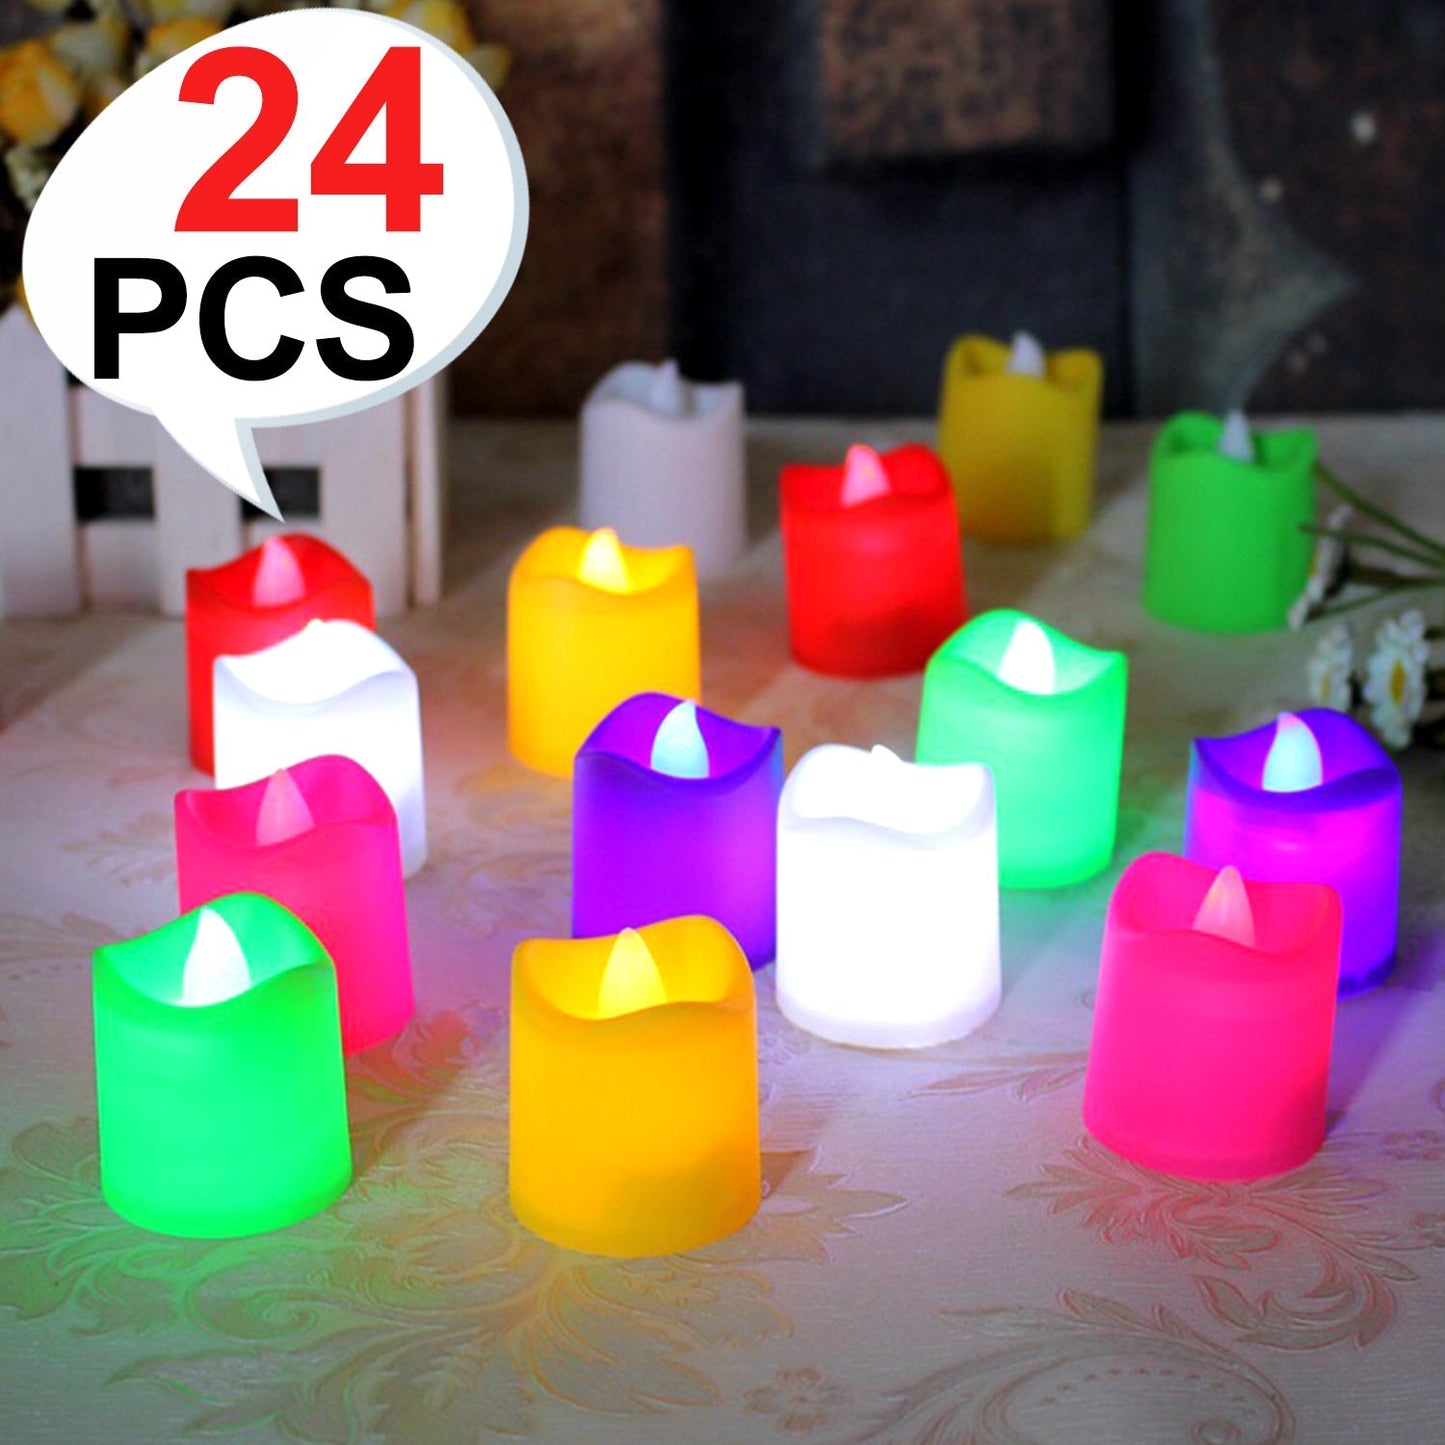 24Pcs Festival Decorative - Led Tealight Candles | Battery Operated Candle Ideal For Party, Wedding, Birthday, Gifts (Multi Color)